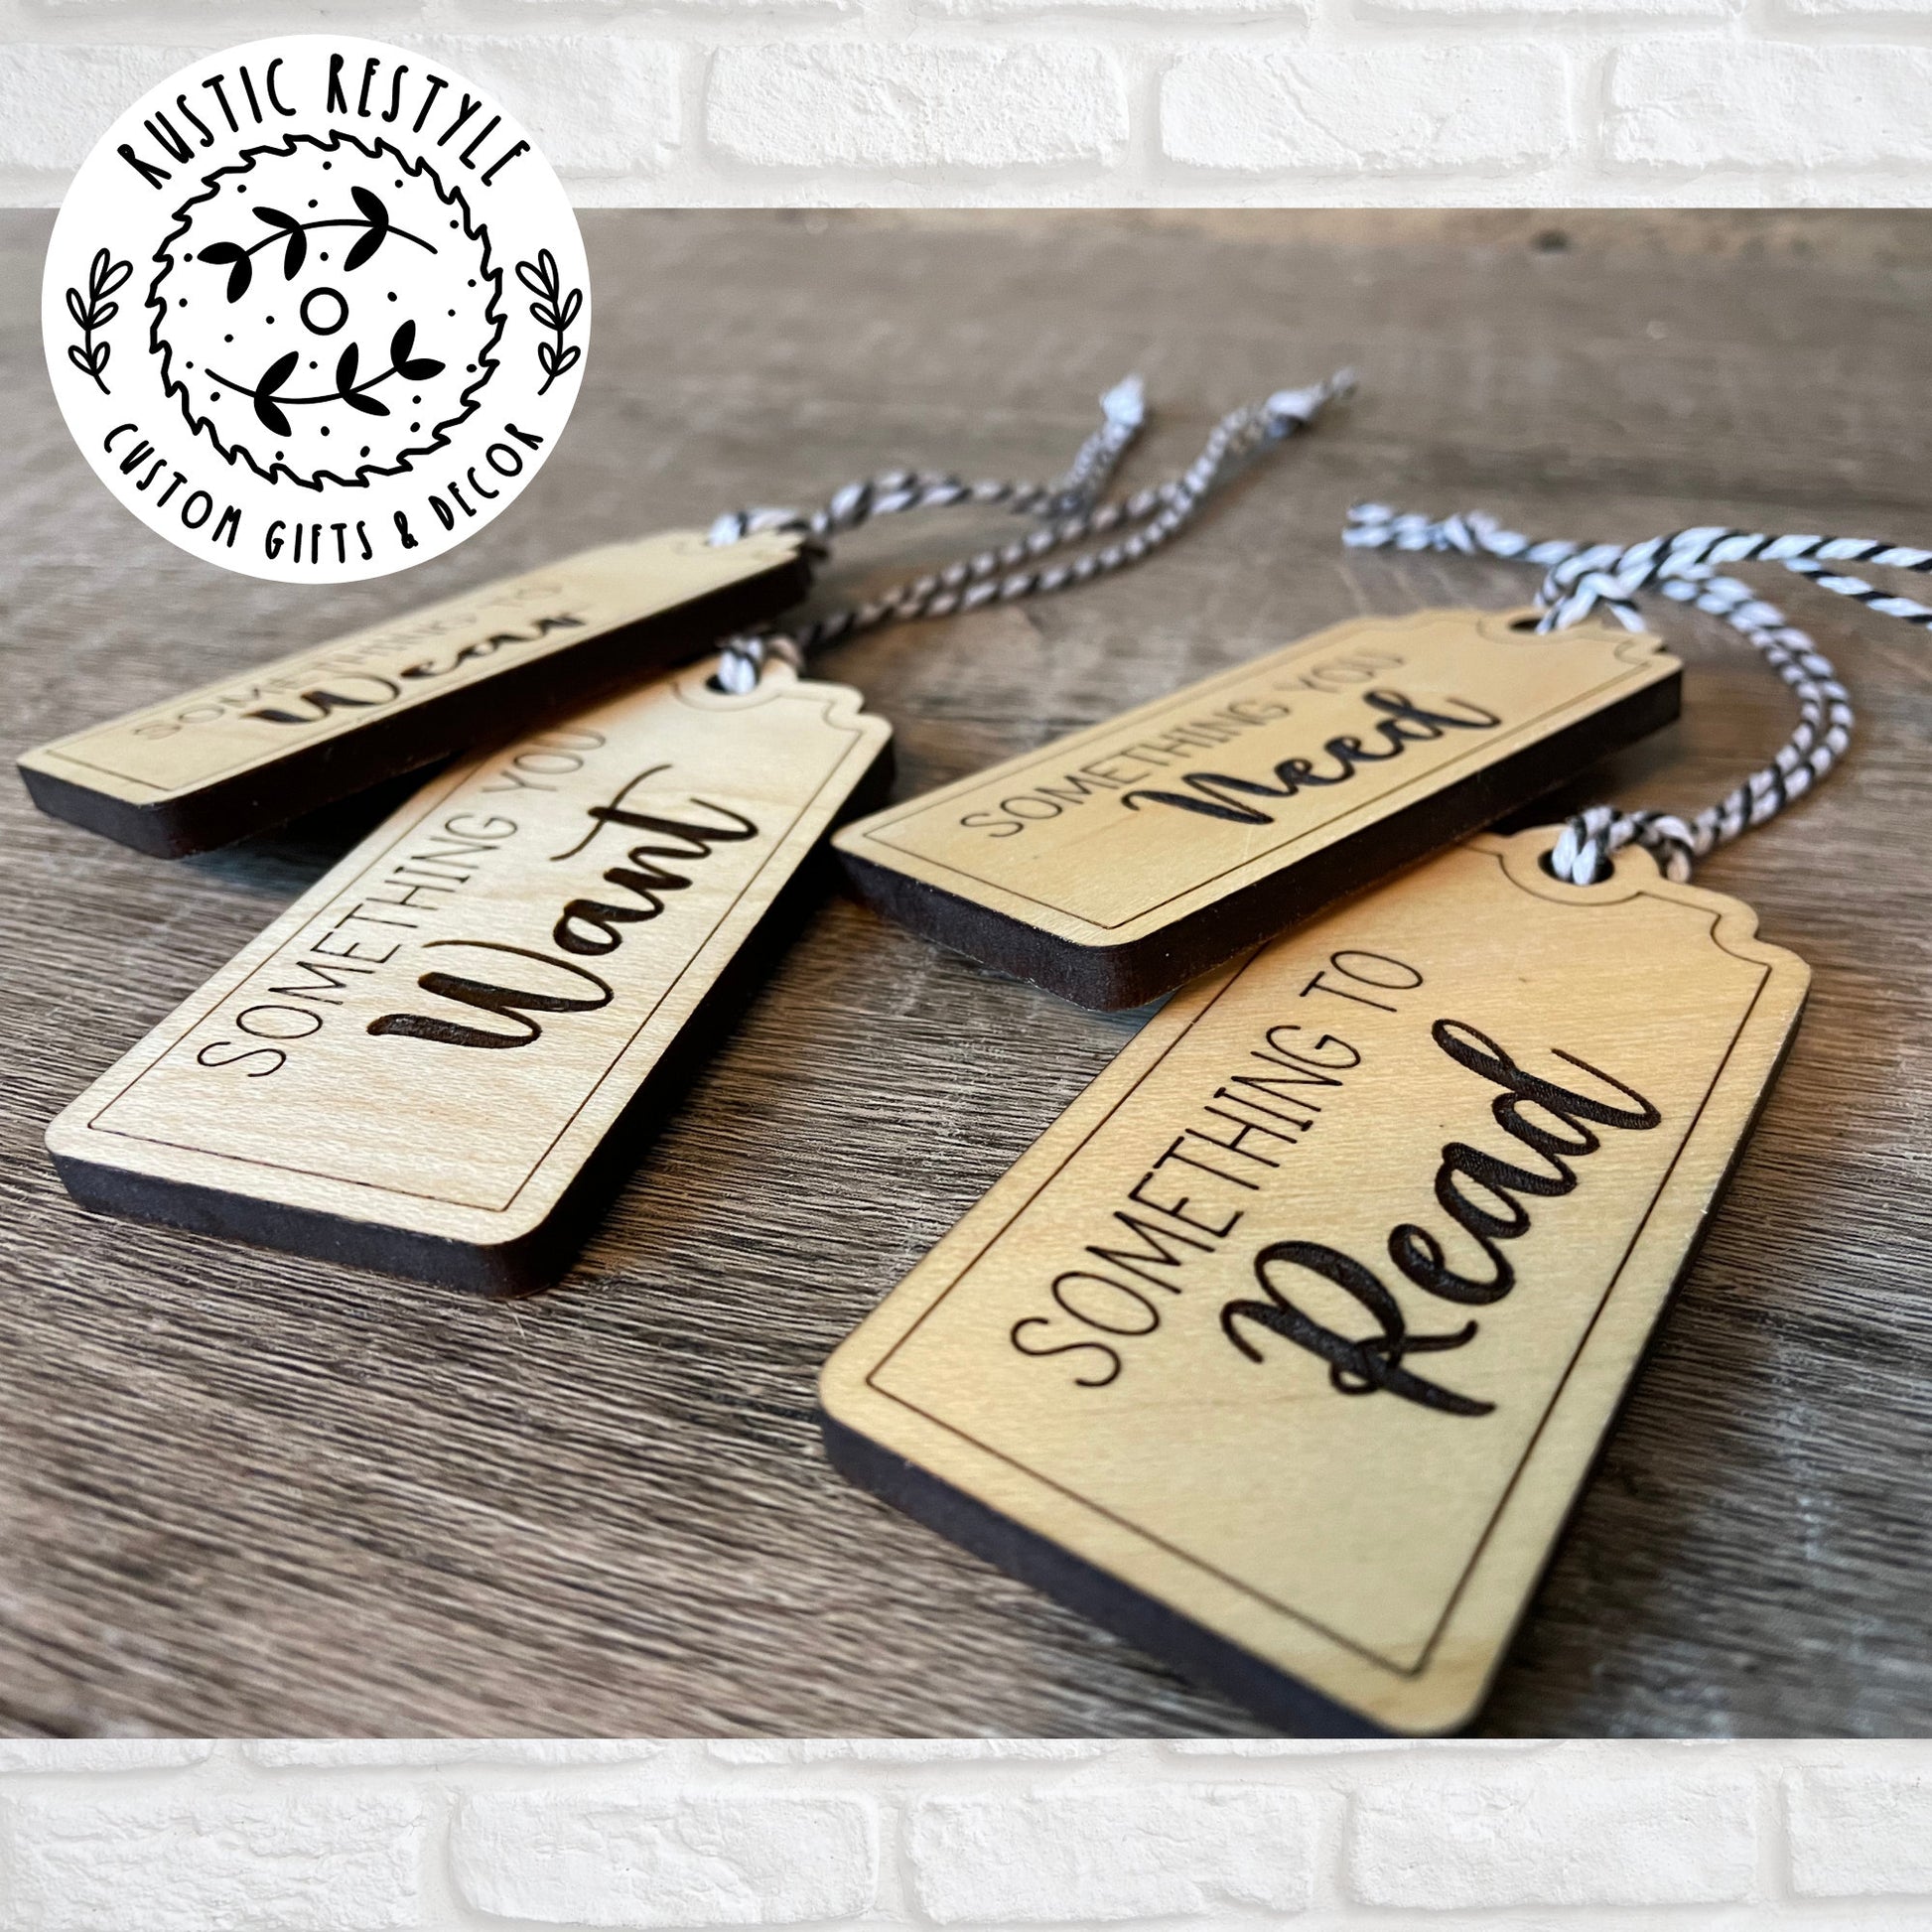 4 Christmas gift tags laying on a wooden table. First tag says Something you Need. Second tag says Something you Want. Third tag says Something you Read and the last tag says something you Wear. Each tag has a black and white bakers twine string.